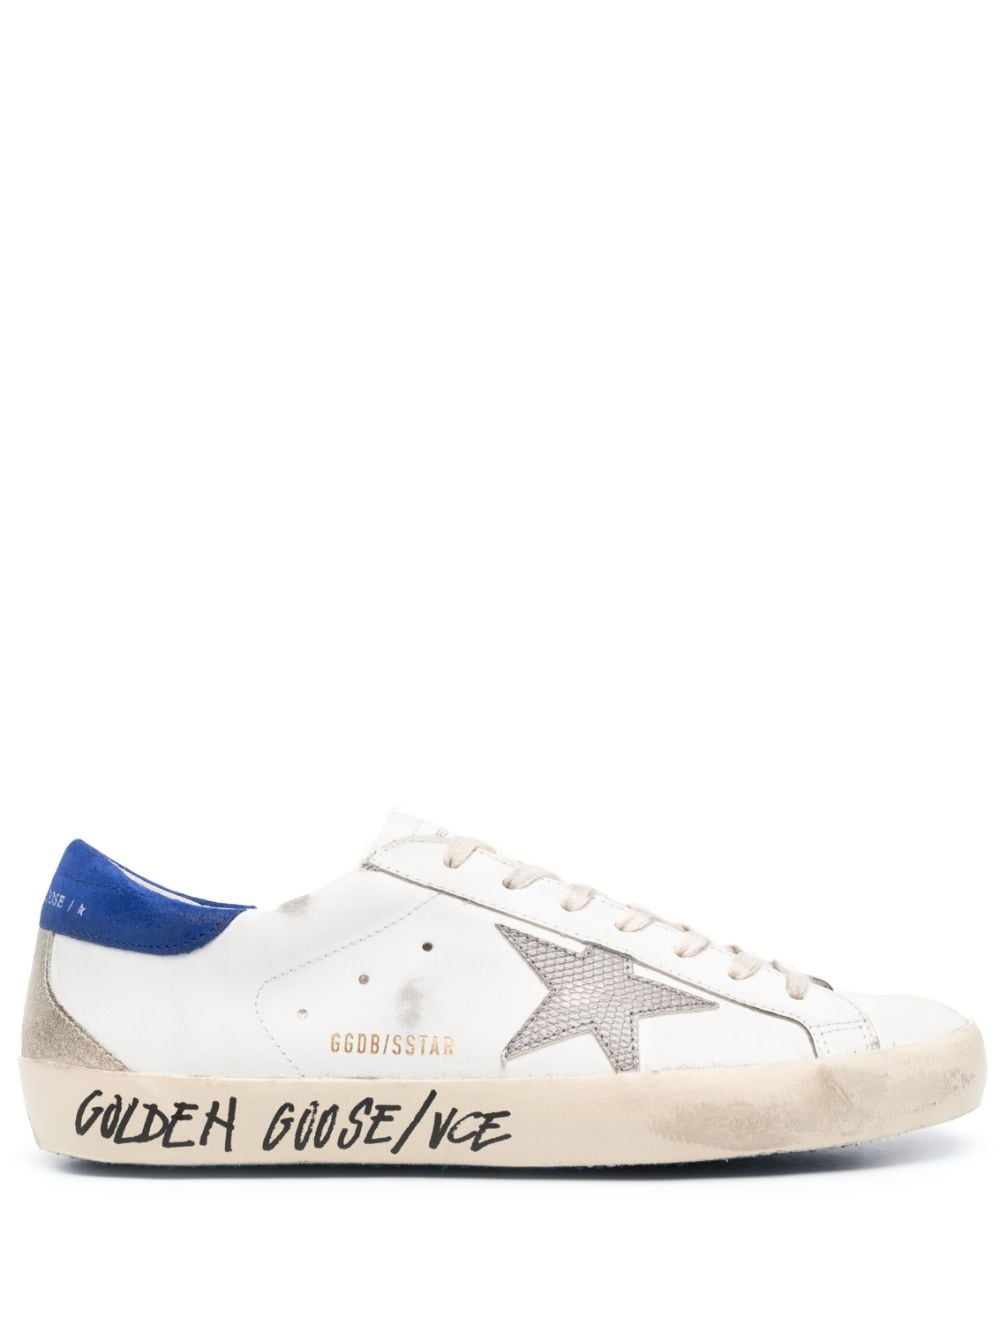 GOLDEN GOOSE Men's Distressed Leather Navy Sneakers for FW23